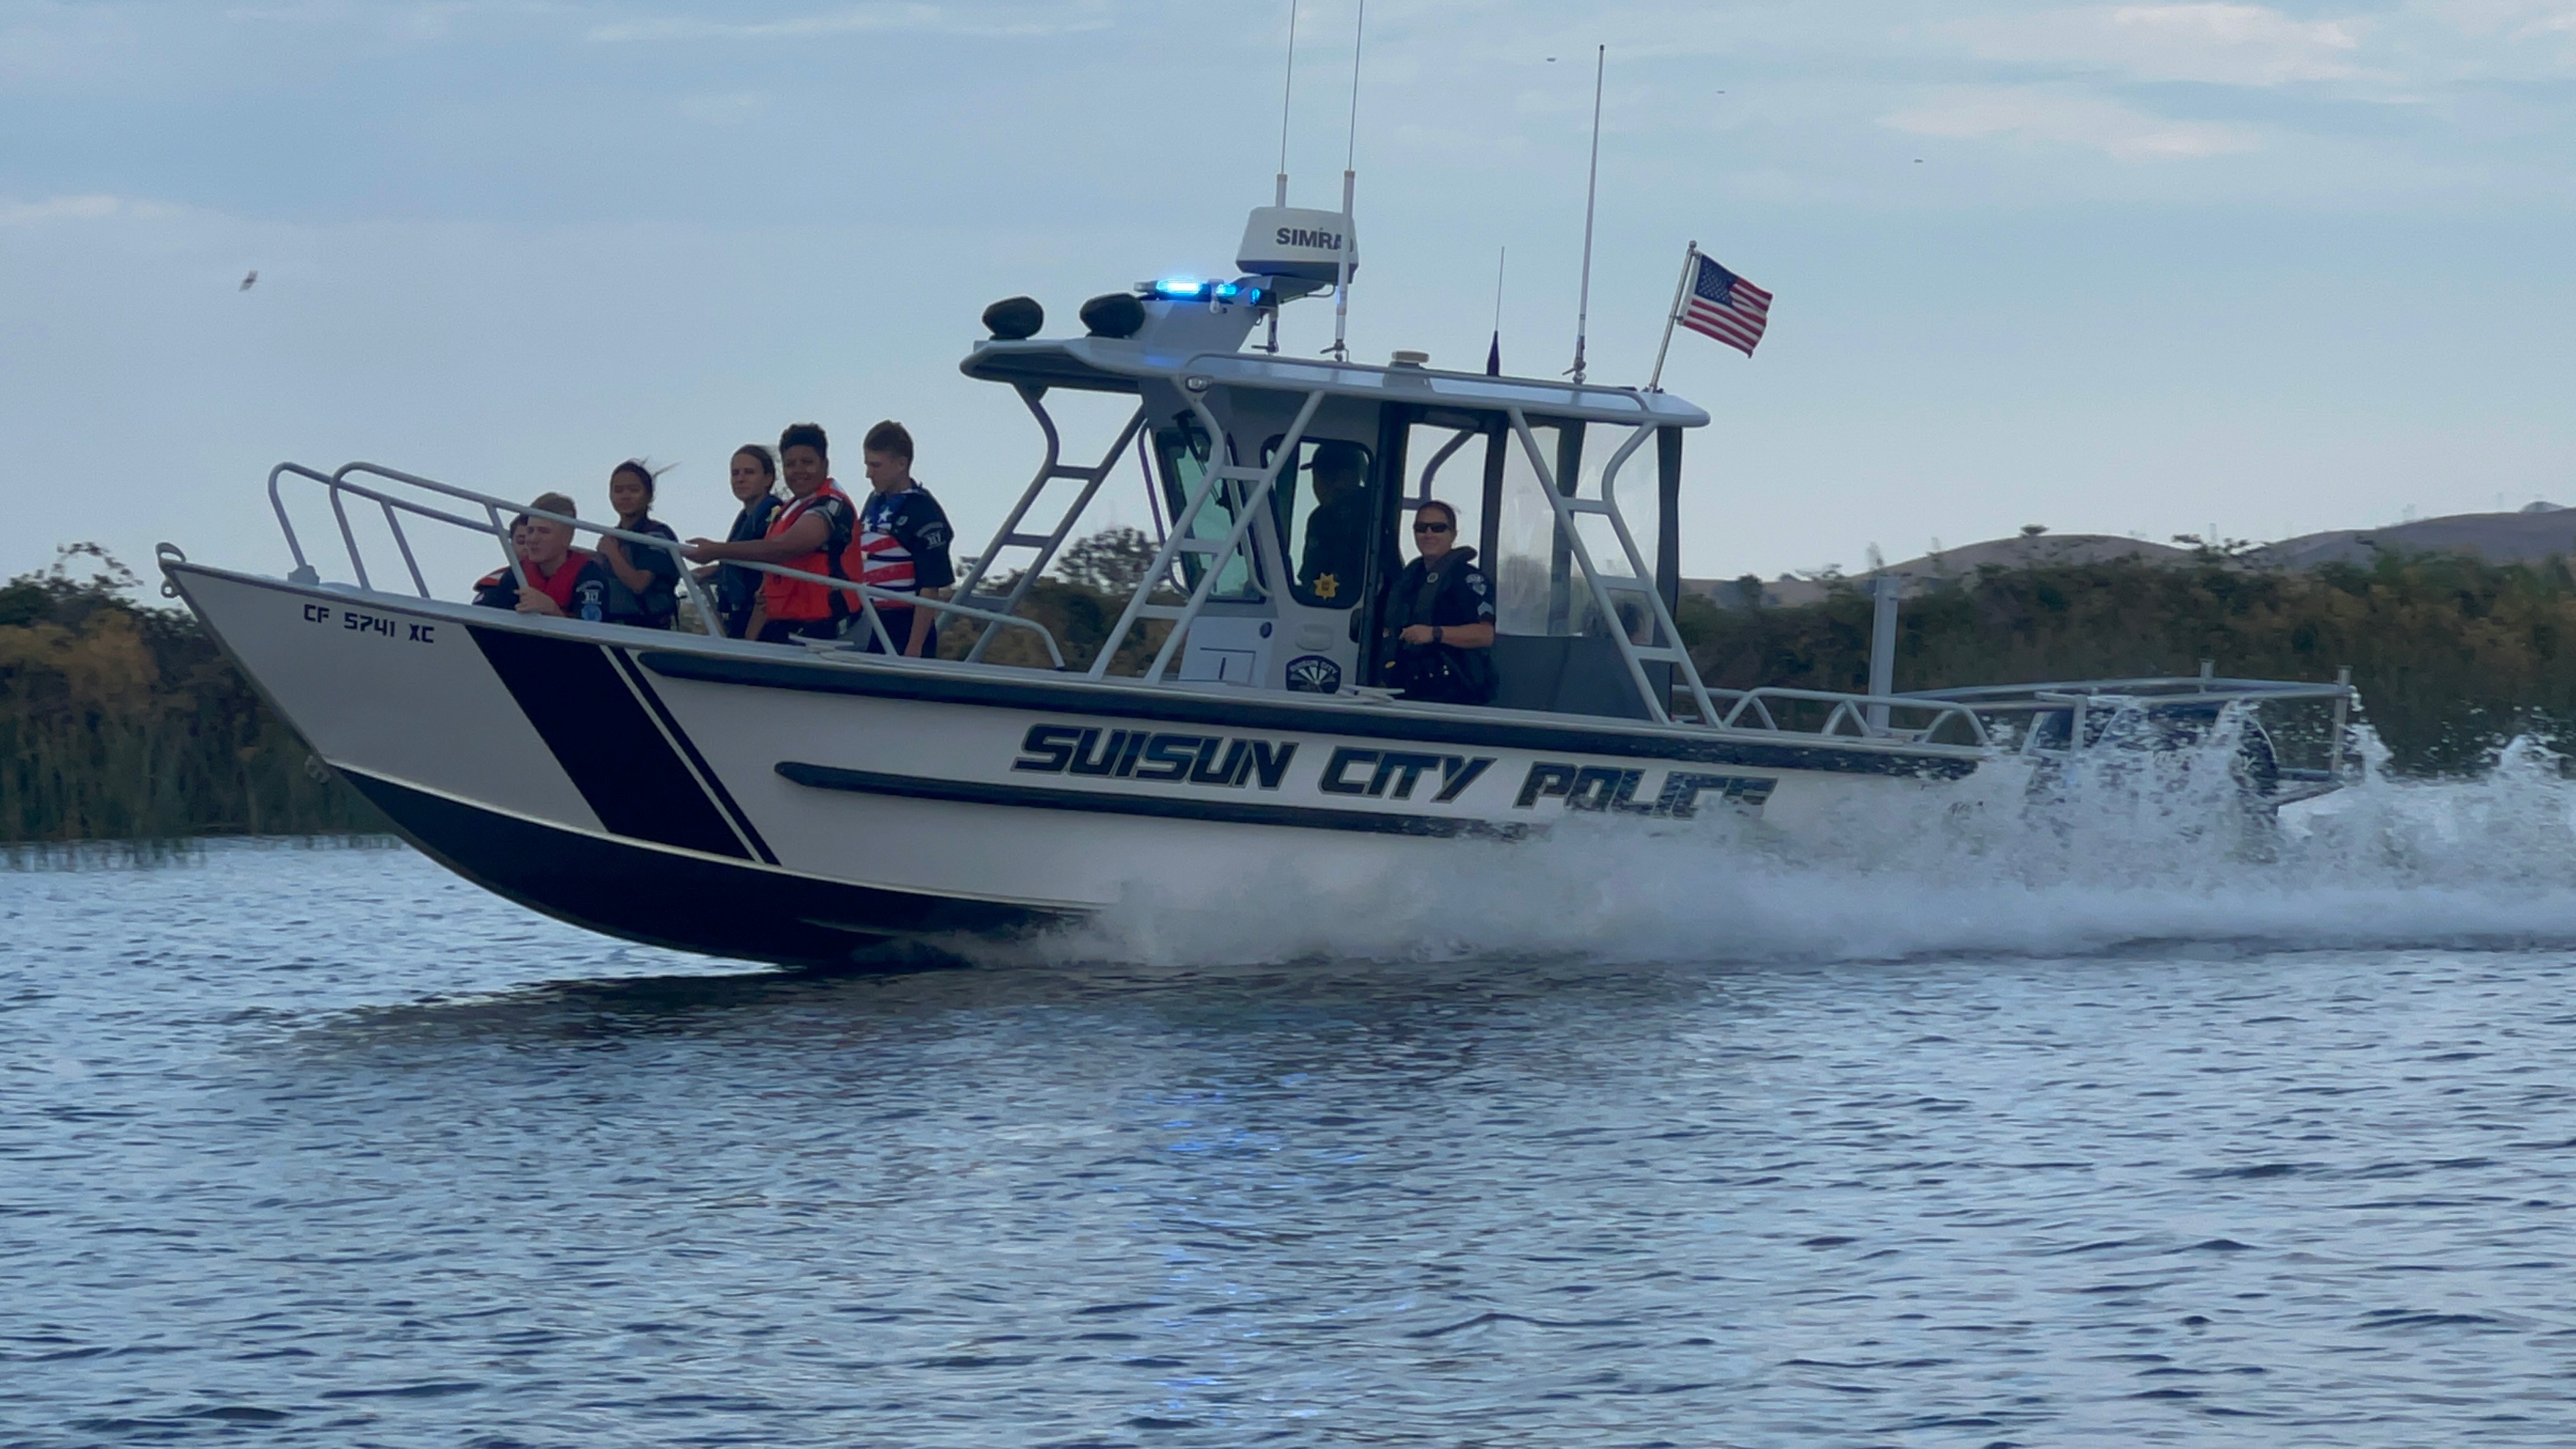 The Suisun City Police Dept Boat on the water with the Officers on board. 